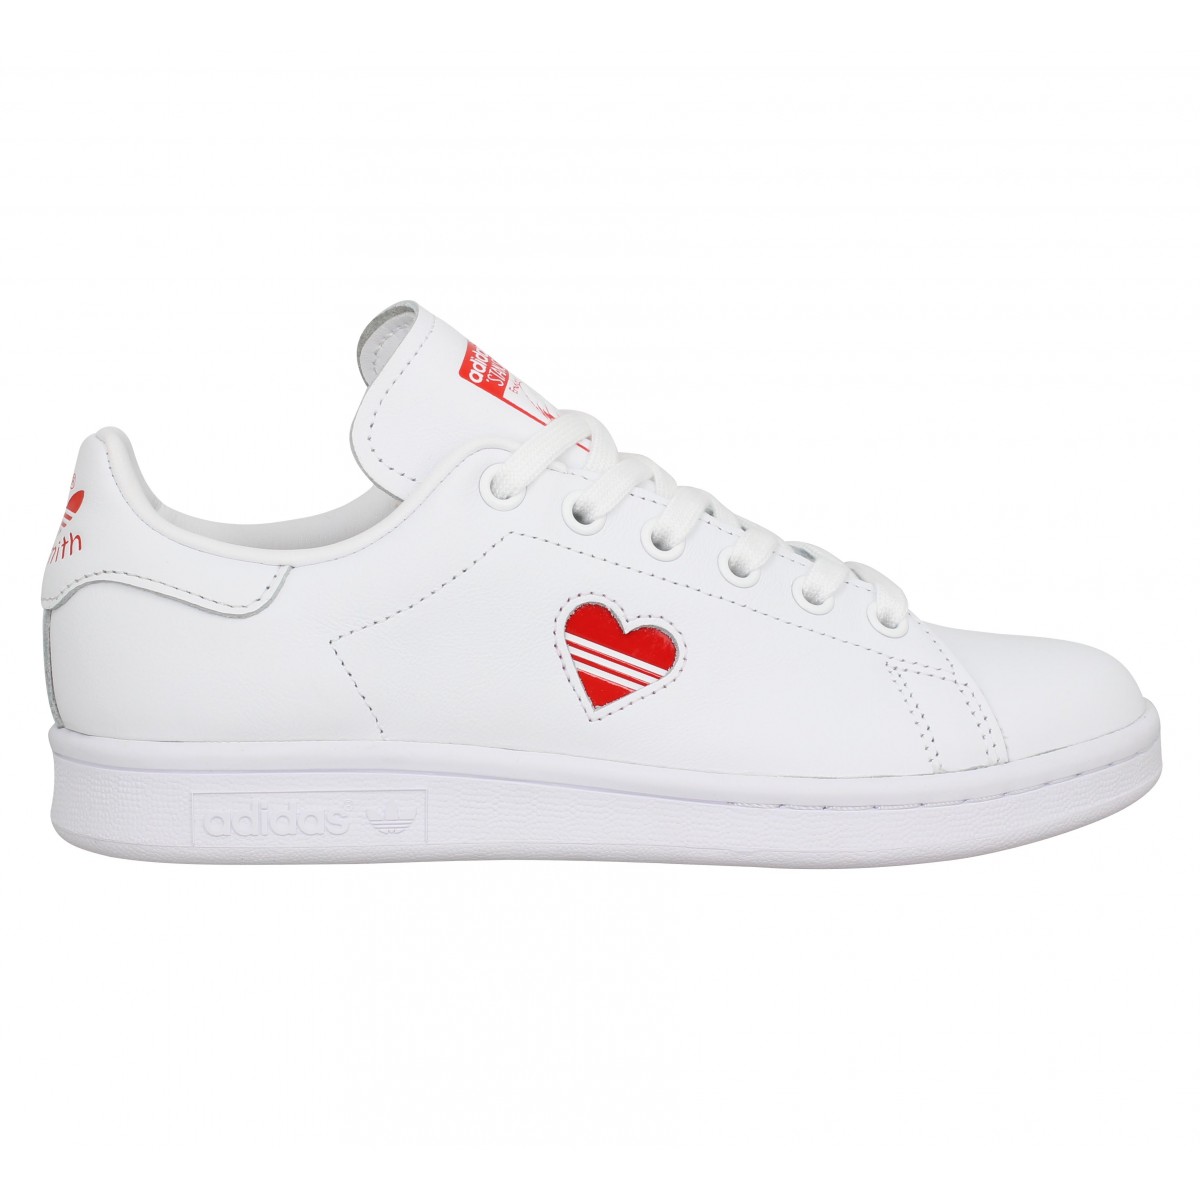 stan smith rouge cuir